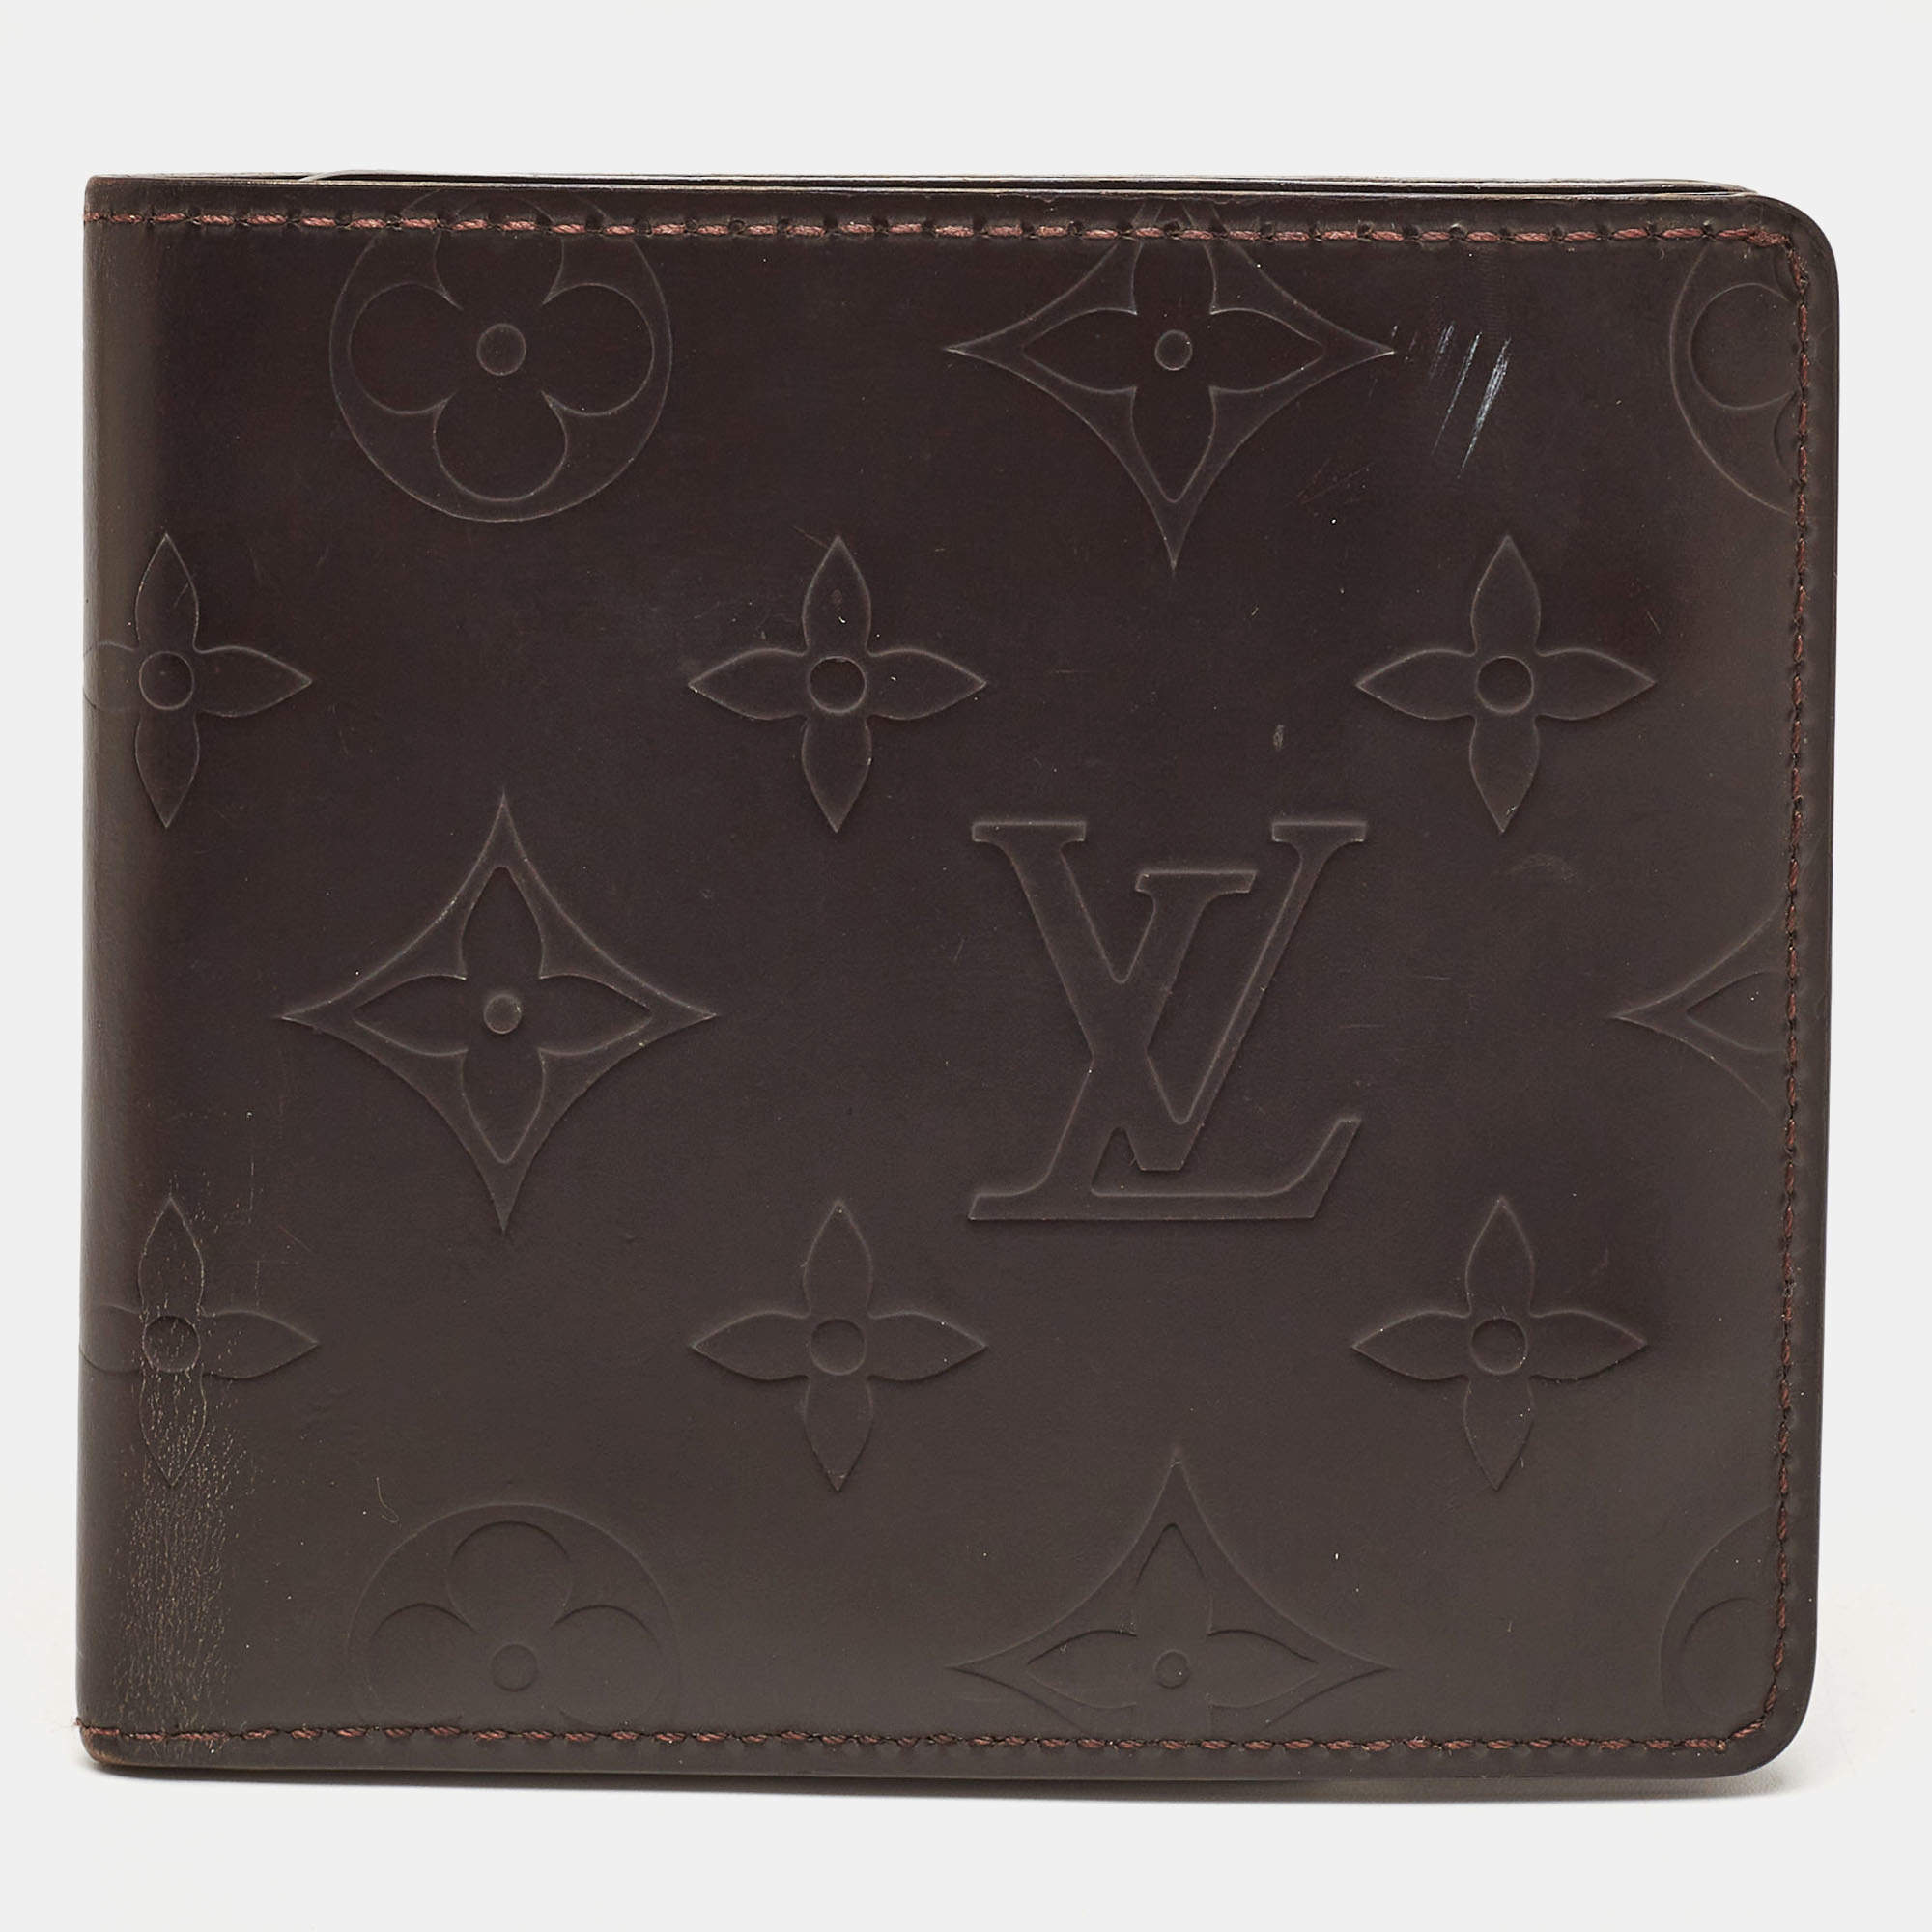 Louis Vuitton Cafe Brown Leather Monogram Glazed Compact Wallet 